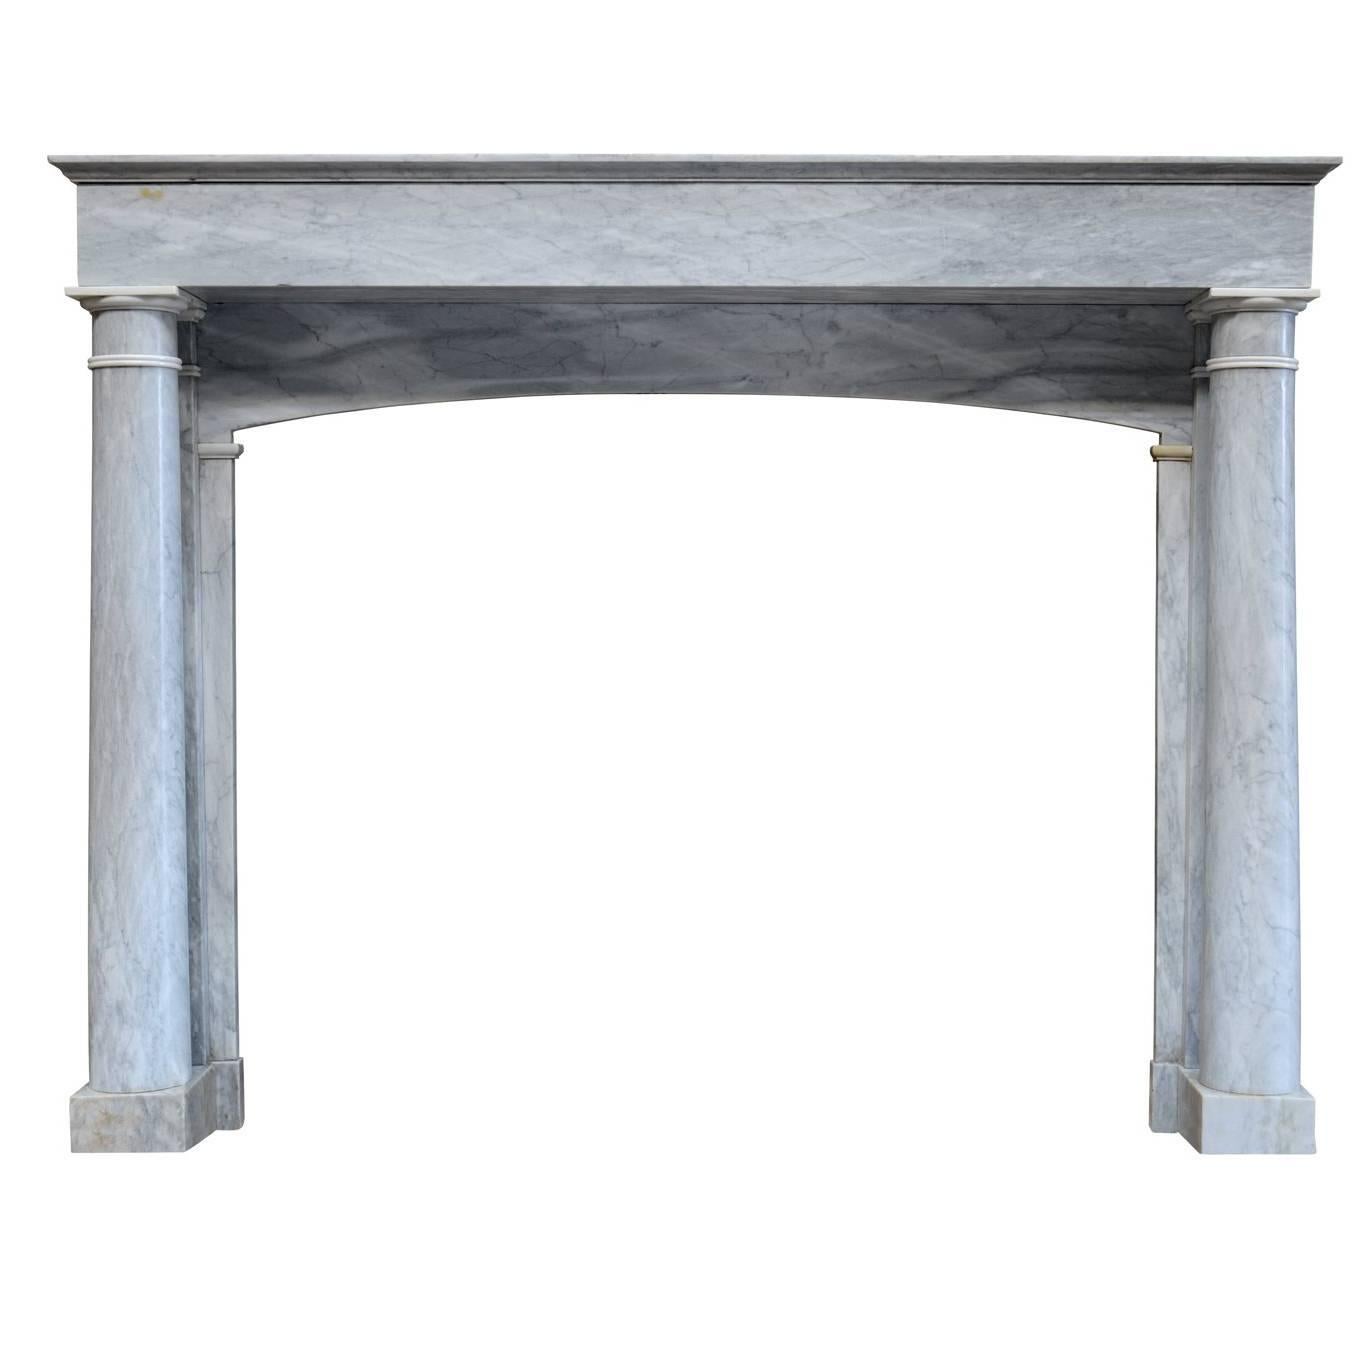 French Empire Period Turquin Blue Marble Fireplace, 19th Century For Sale